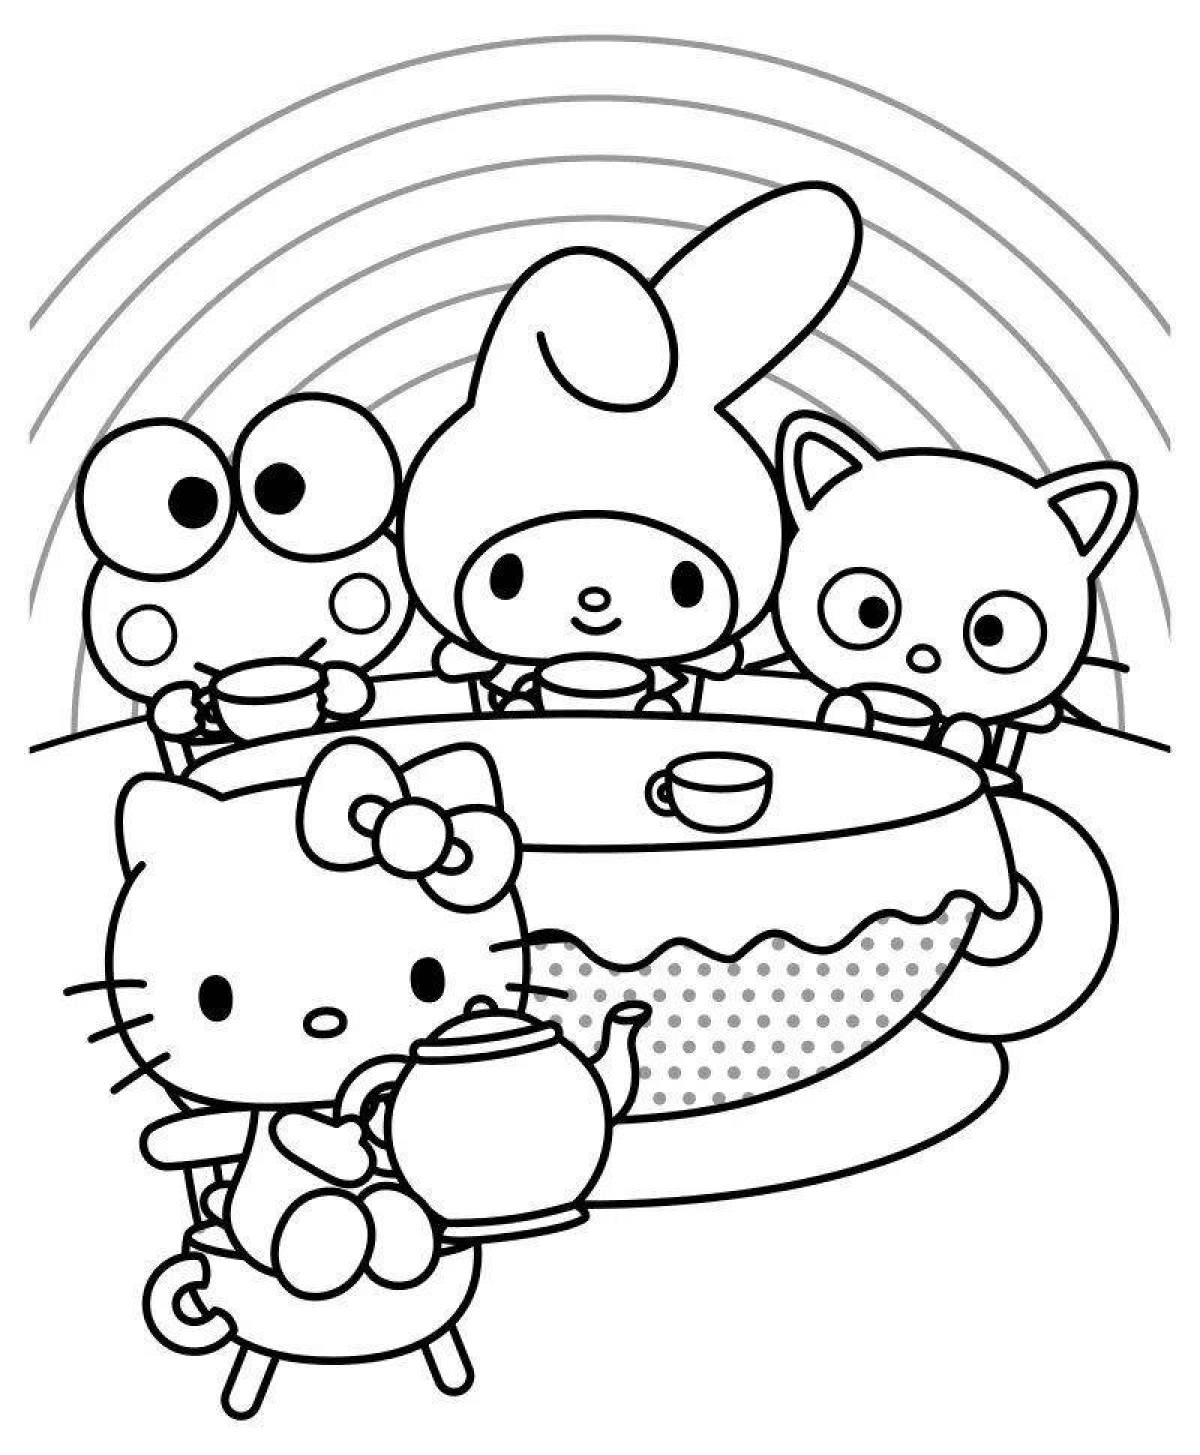 Colour-loving kuromi and melody coloring book